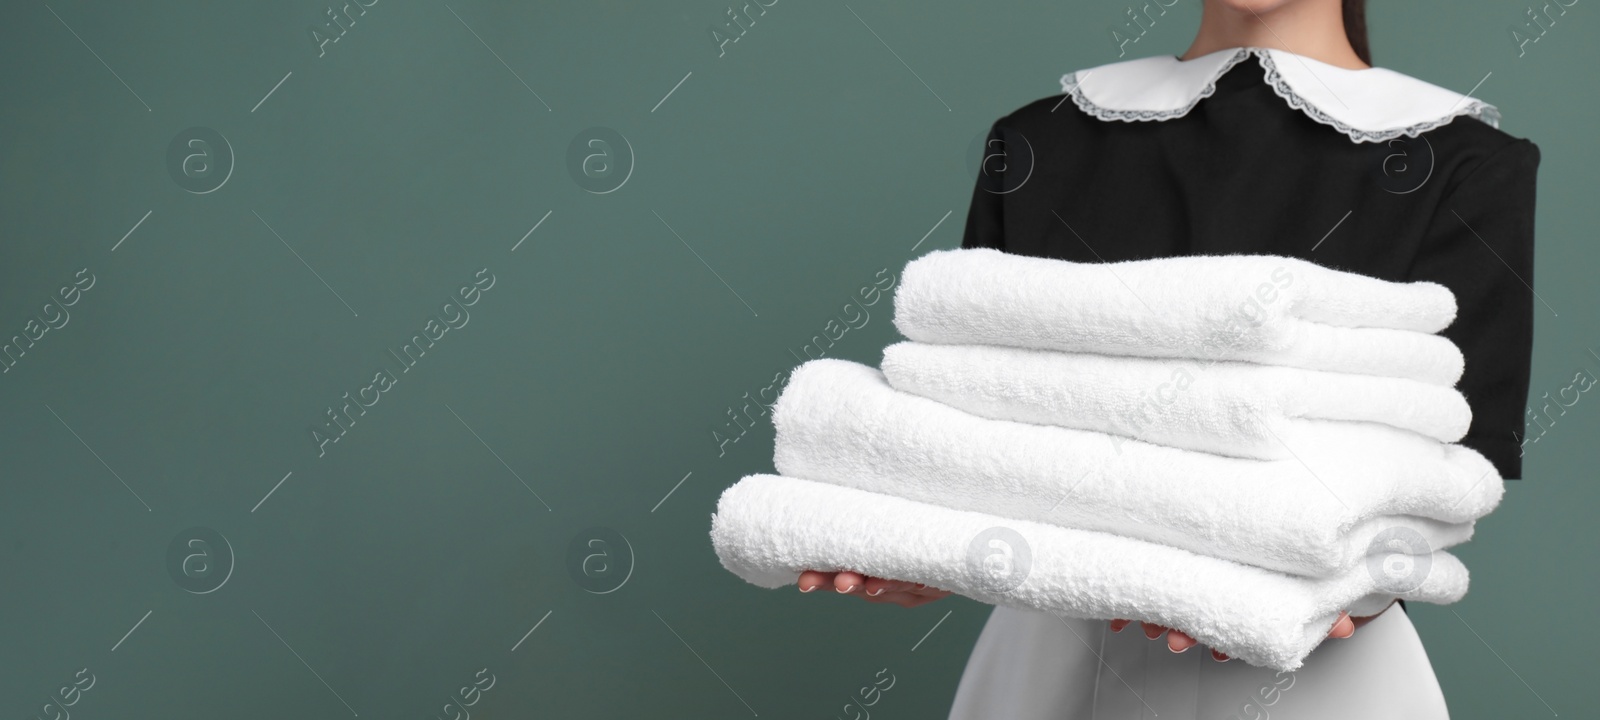 Image of Young chambermaid holding stack of clean towels on color background, closeup view with space for text. Banner design